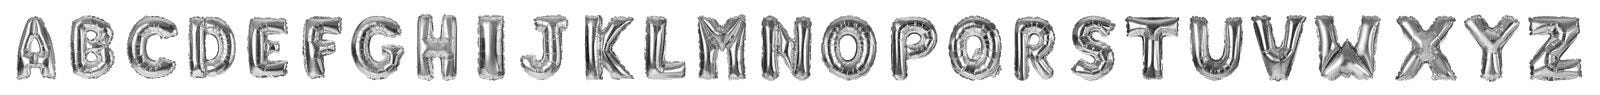 Set with silver foil balloons in shape of letters on background